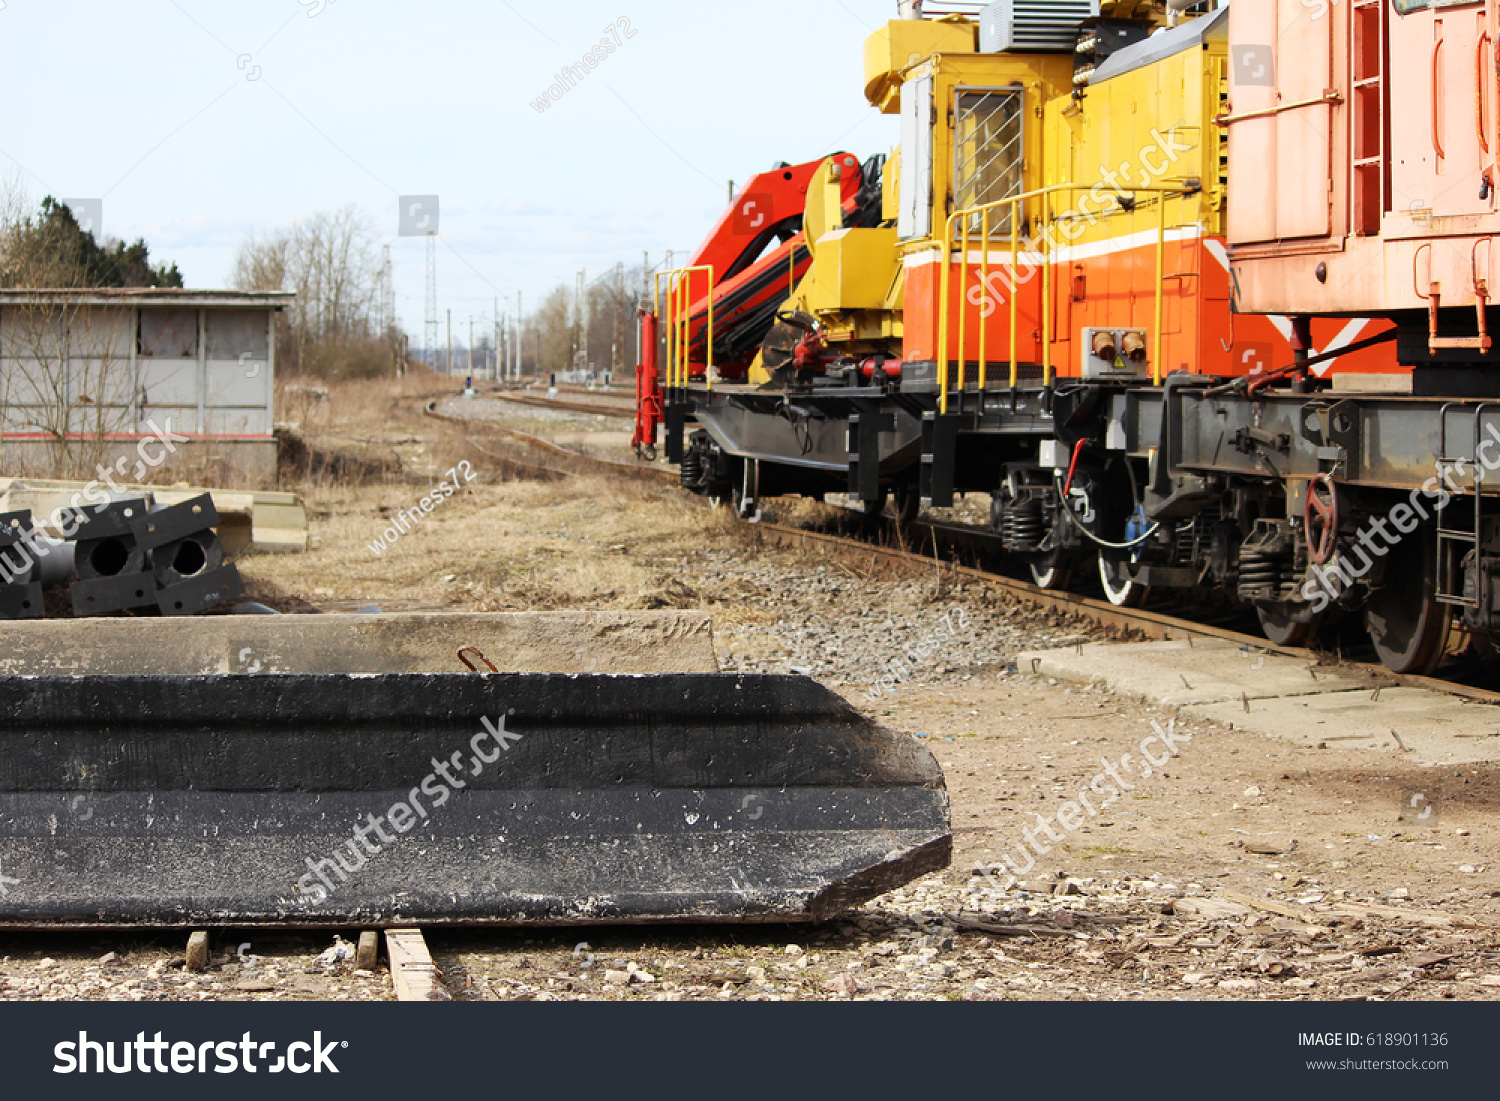 Reinforced concrete piles lie on the ground after unloading with a loader on the railway. #618901136